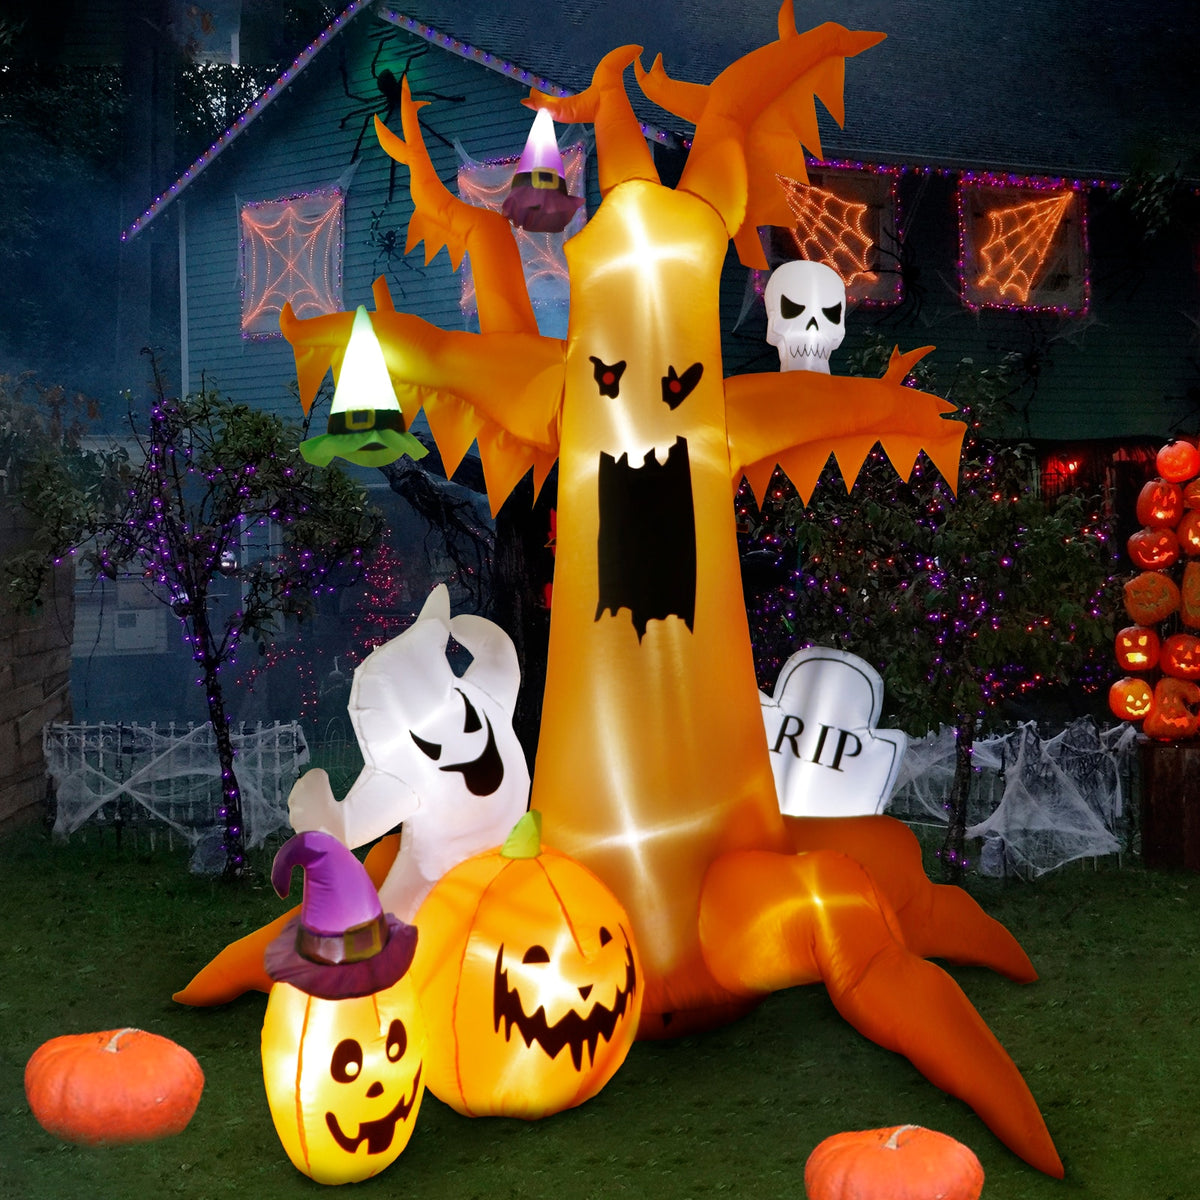 Ourwarm 8ft Halloween Inflatable Decorations Outdoor Garden Scary Tree With Ghost Pumpkin Skeleton Tombstone Blow Up Inflatables